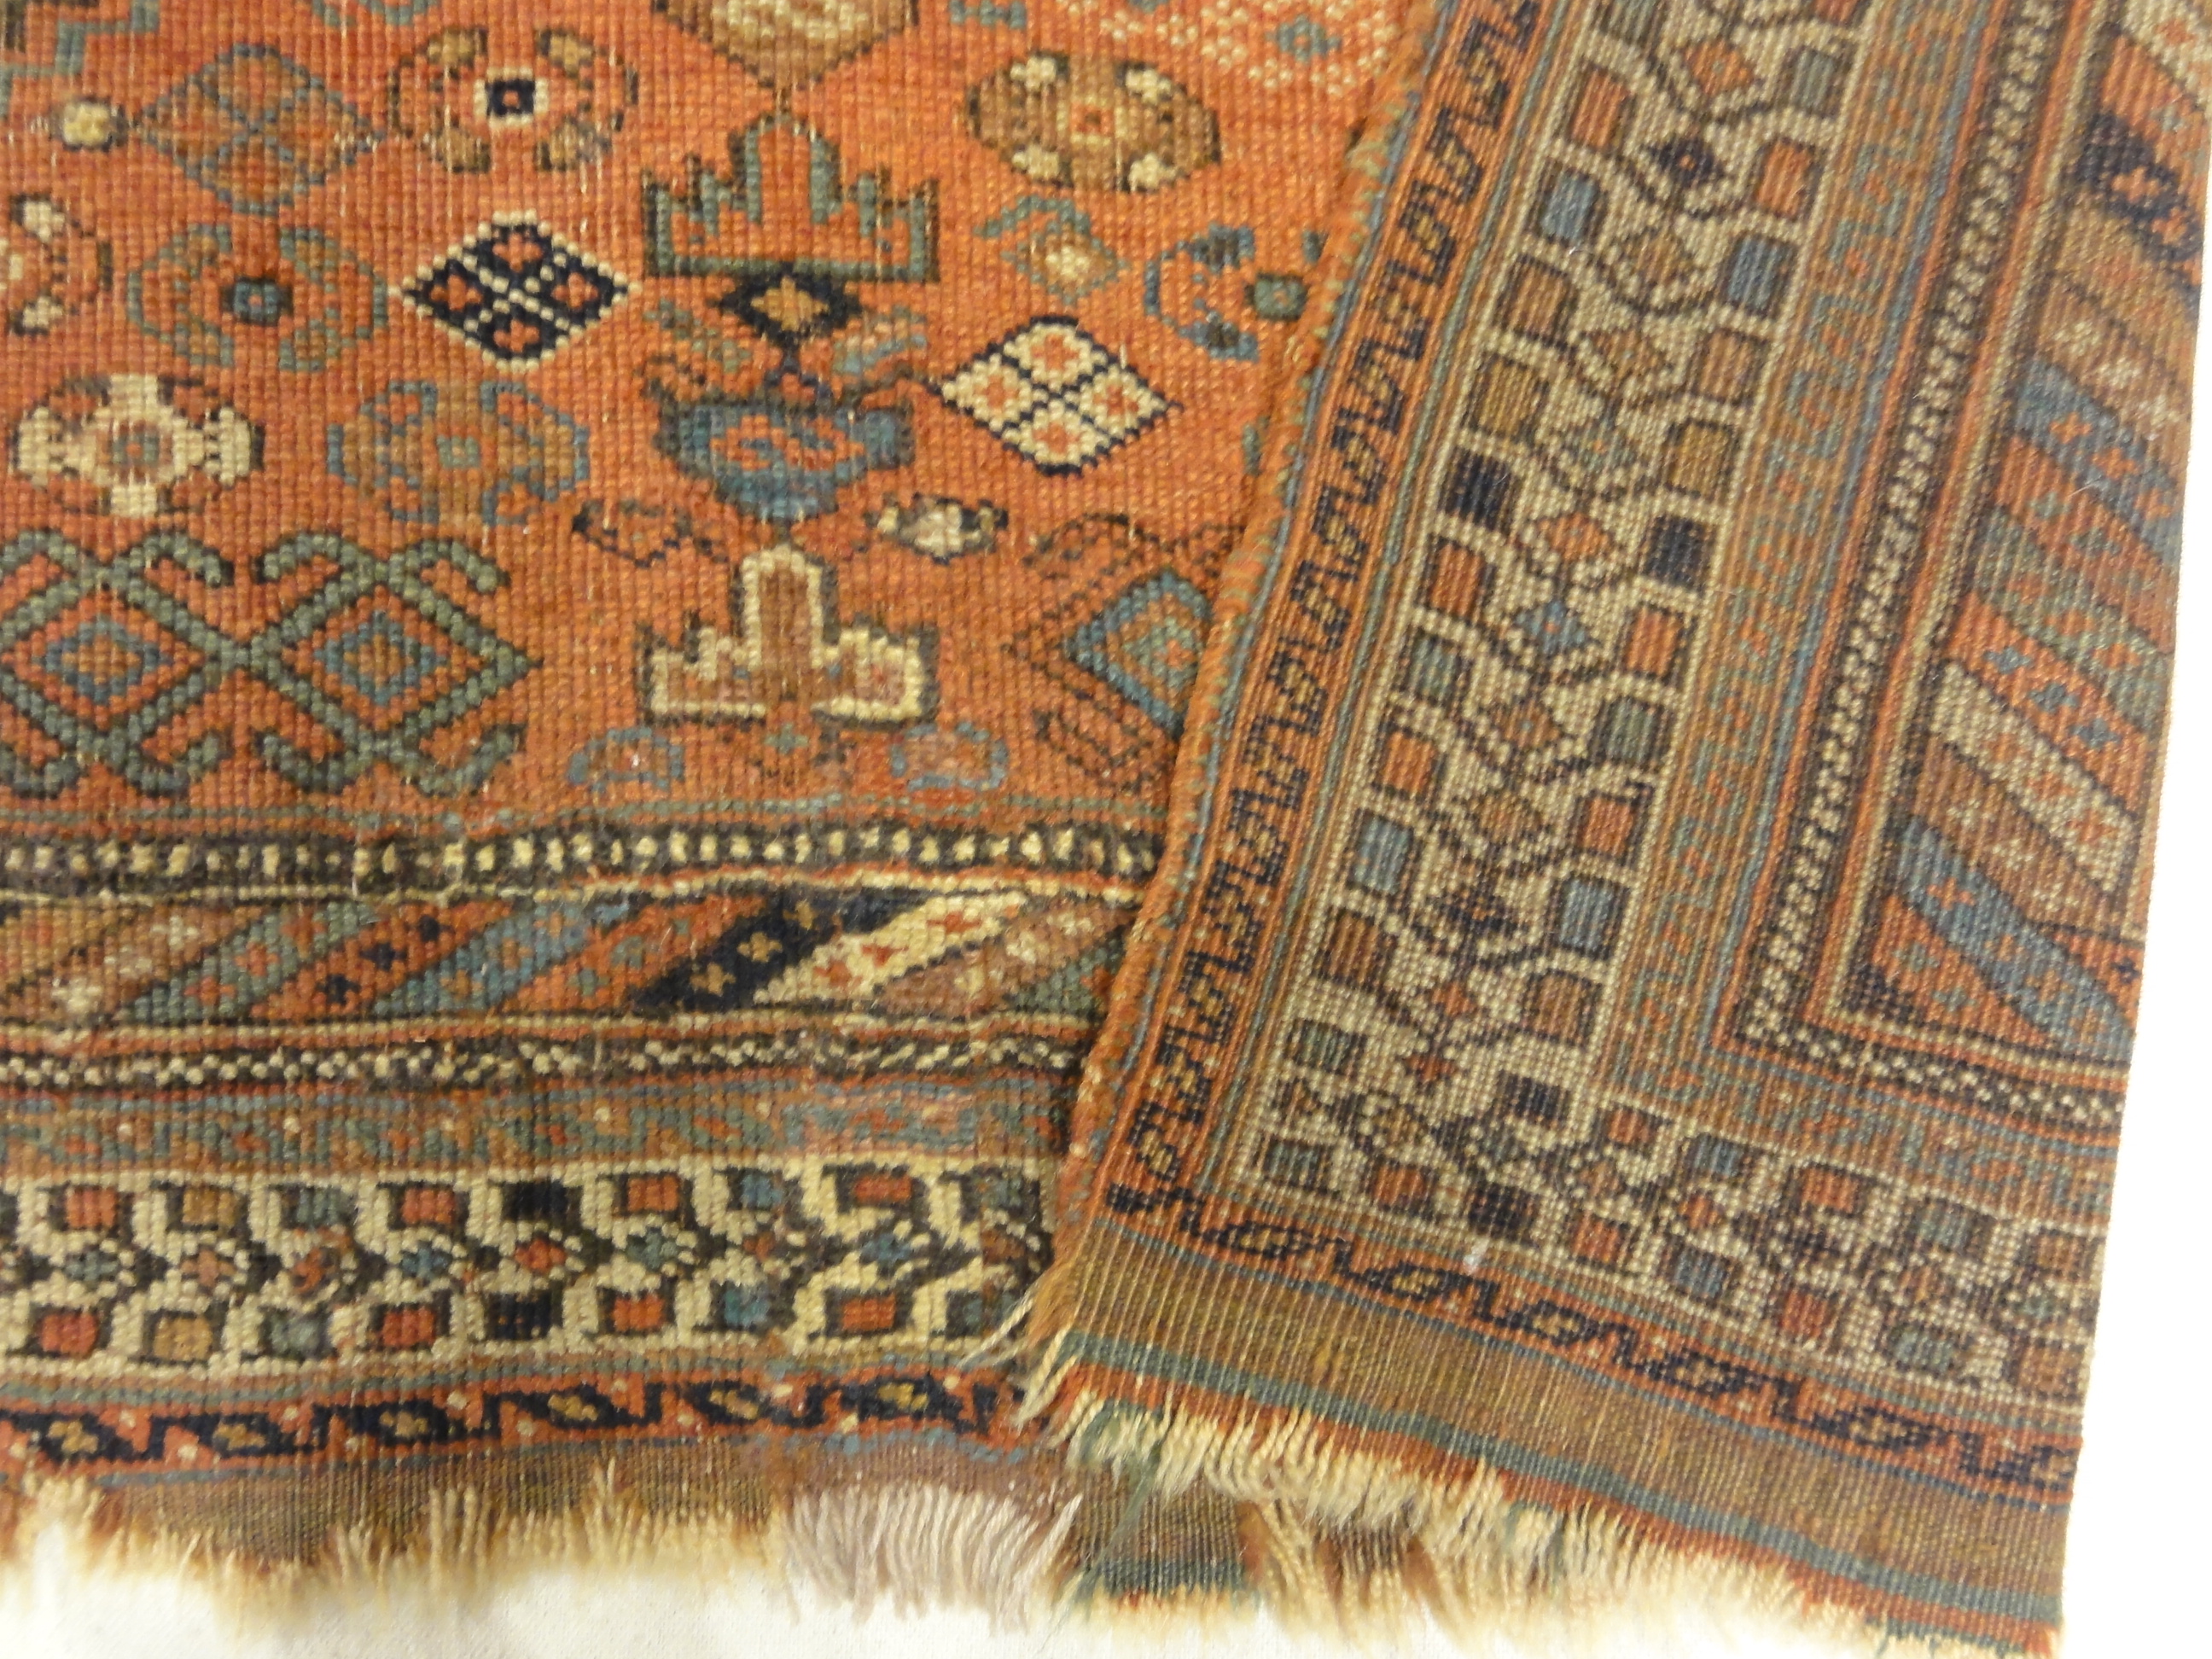 Very Antique Persian Afshar The Oldest Rug We Have Genuine Authentic Woven Carpet Art Santa Barbara Design Center Rugs and More